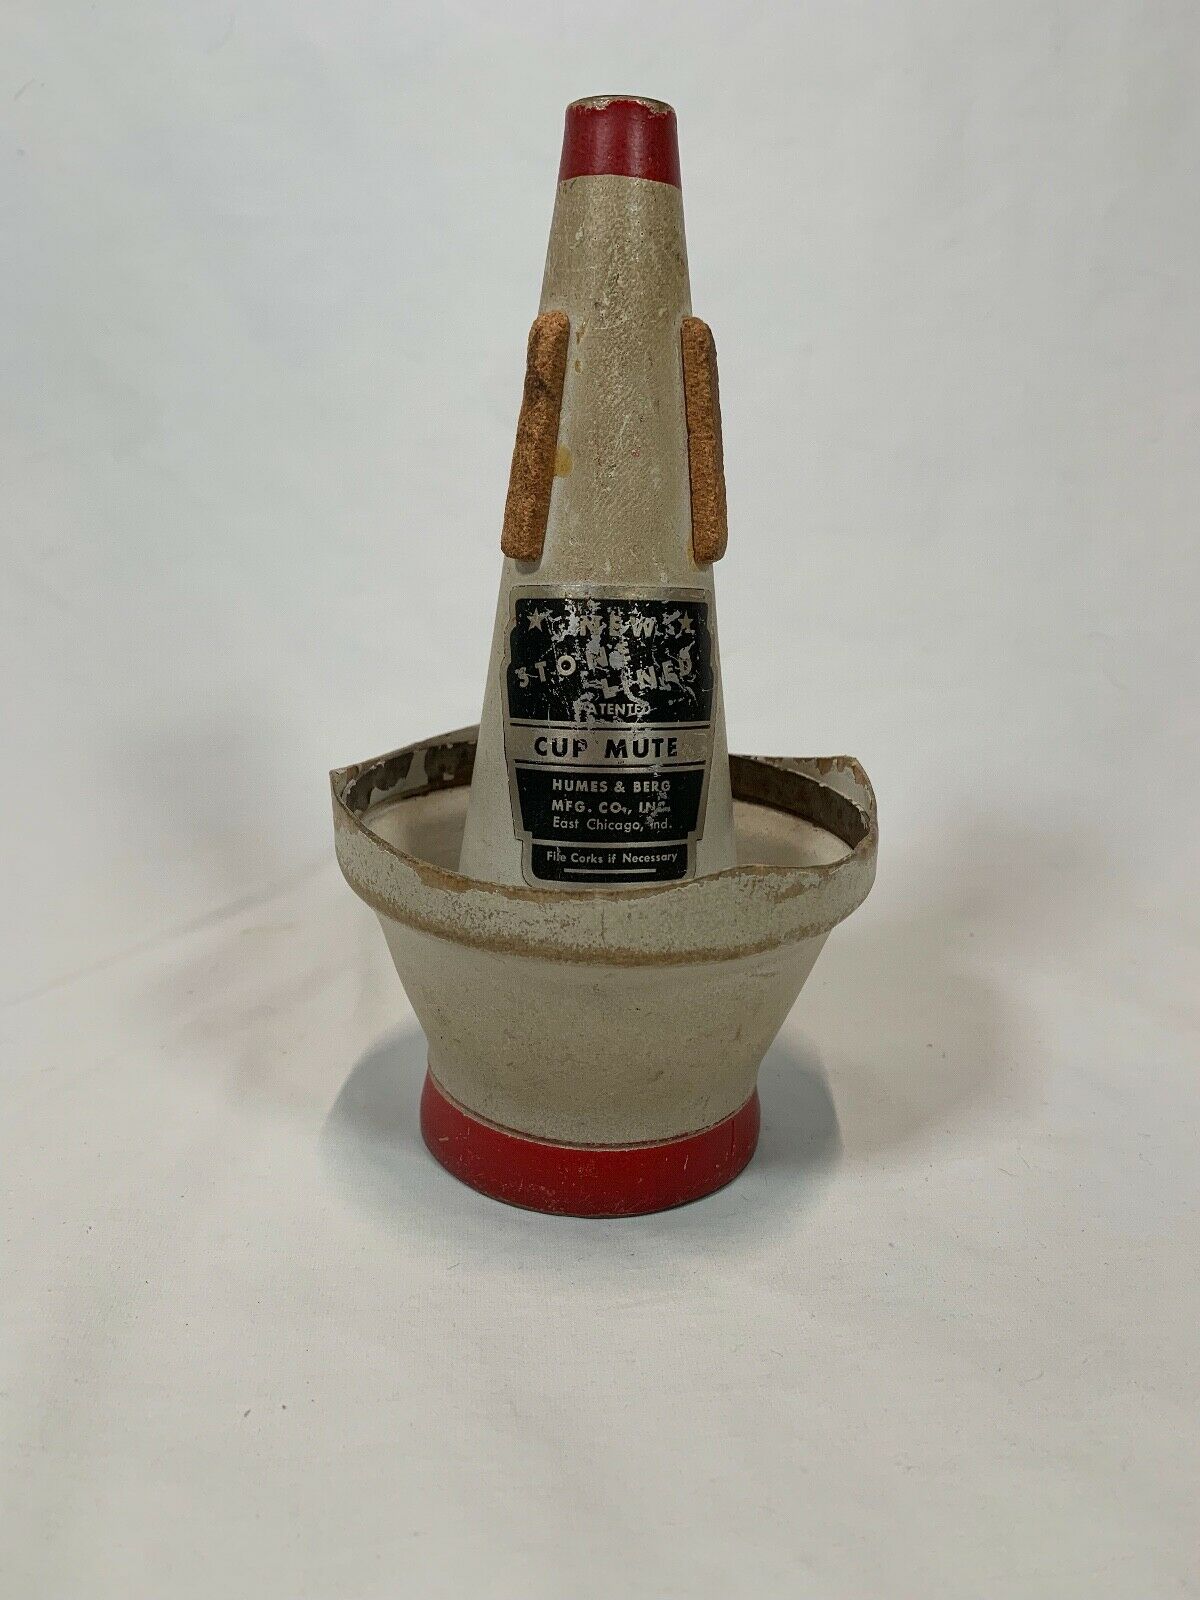 Vintage Horn Mute "cup Mute" Made East Chicago Red, White  New Stone Lined